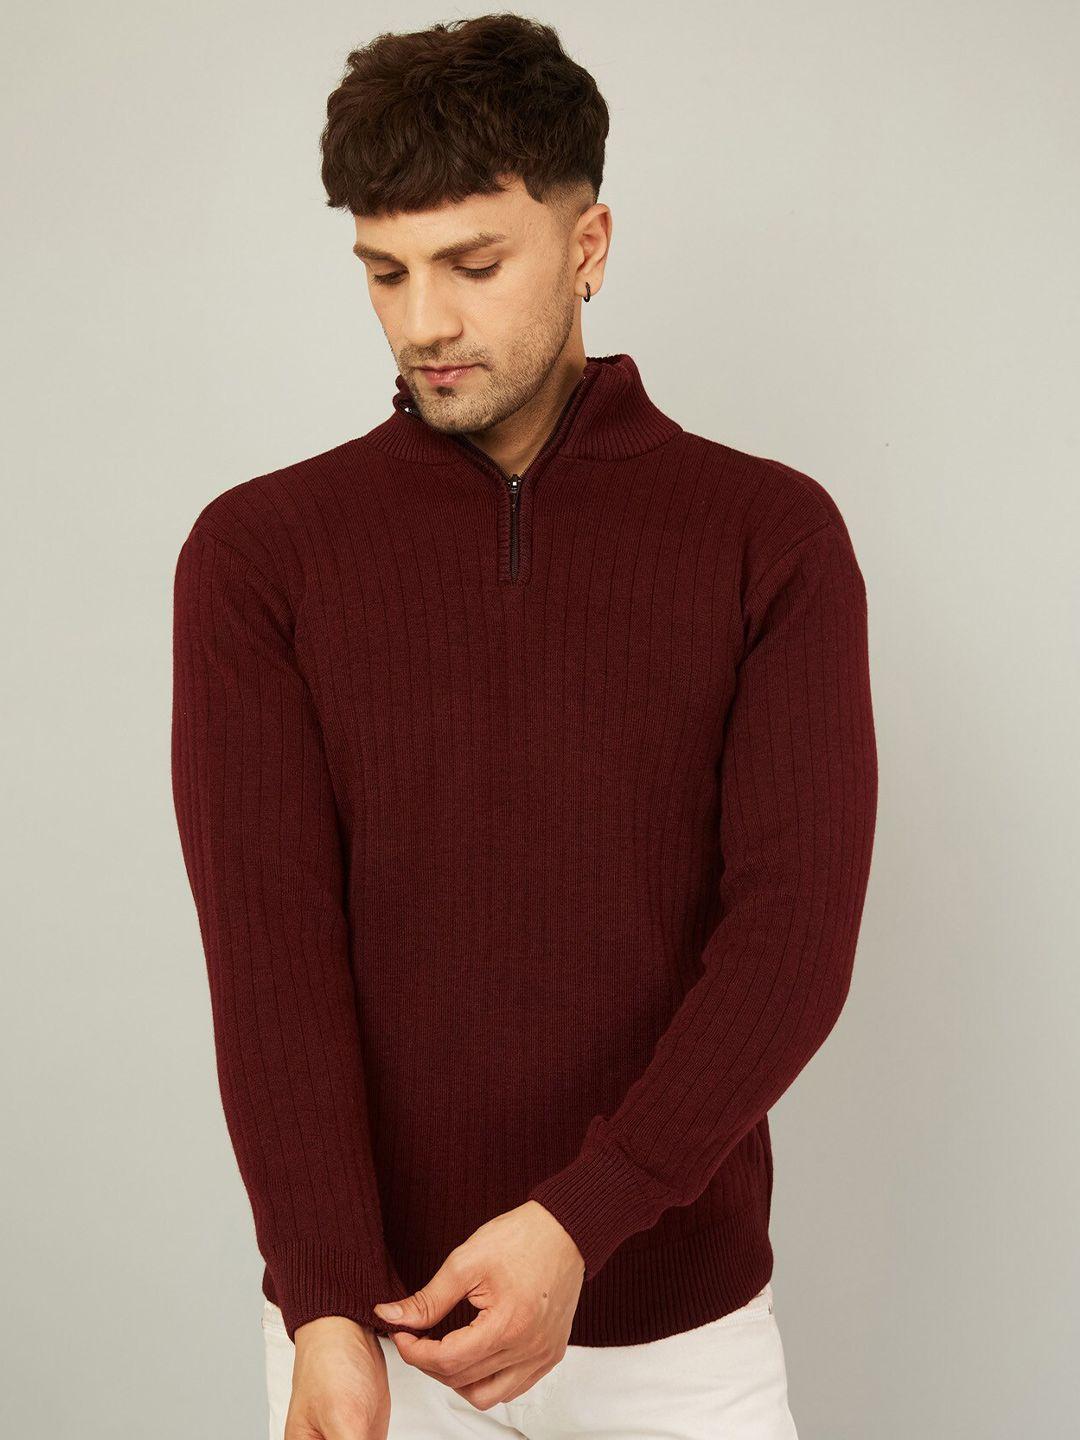 kvetoo-ribbed-mock-collar-acrylic-pullover-sweater